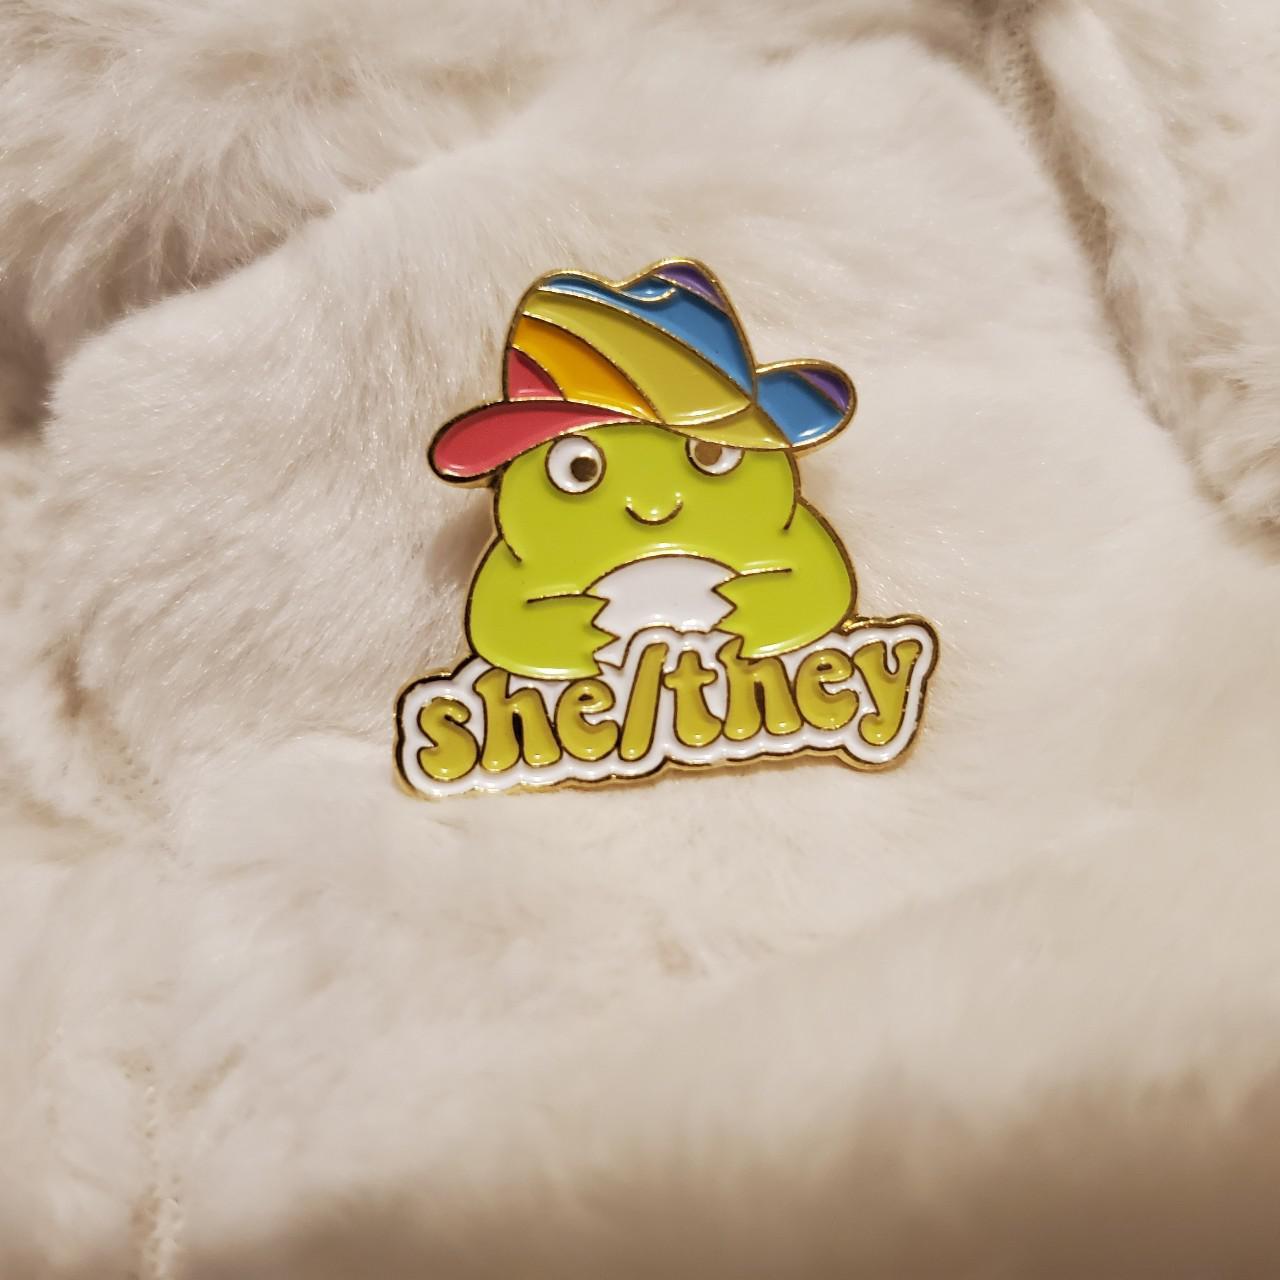 Product Image 1 - She/they frog pronoun pin!

#she #they